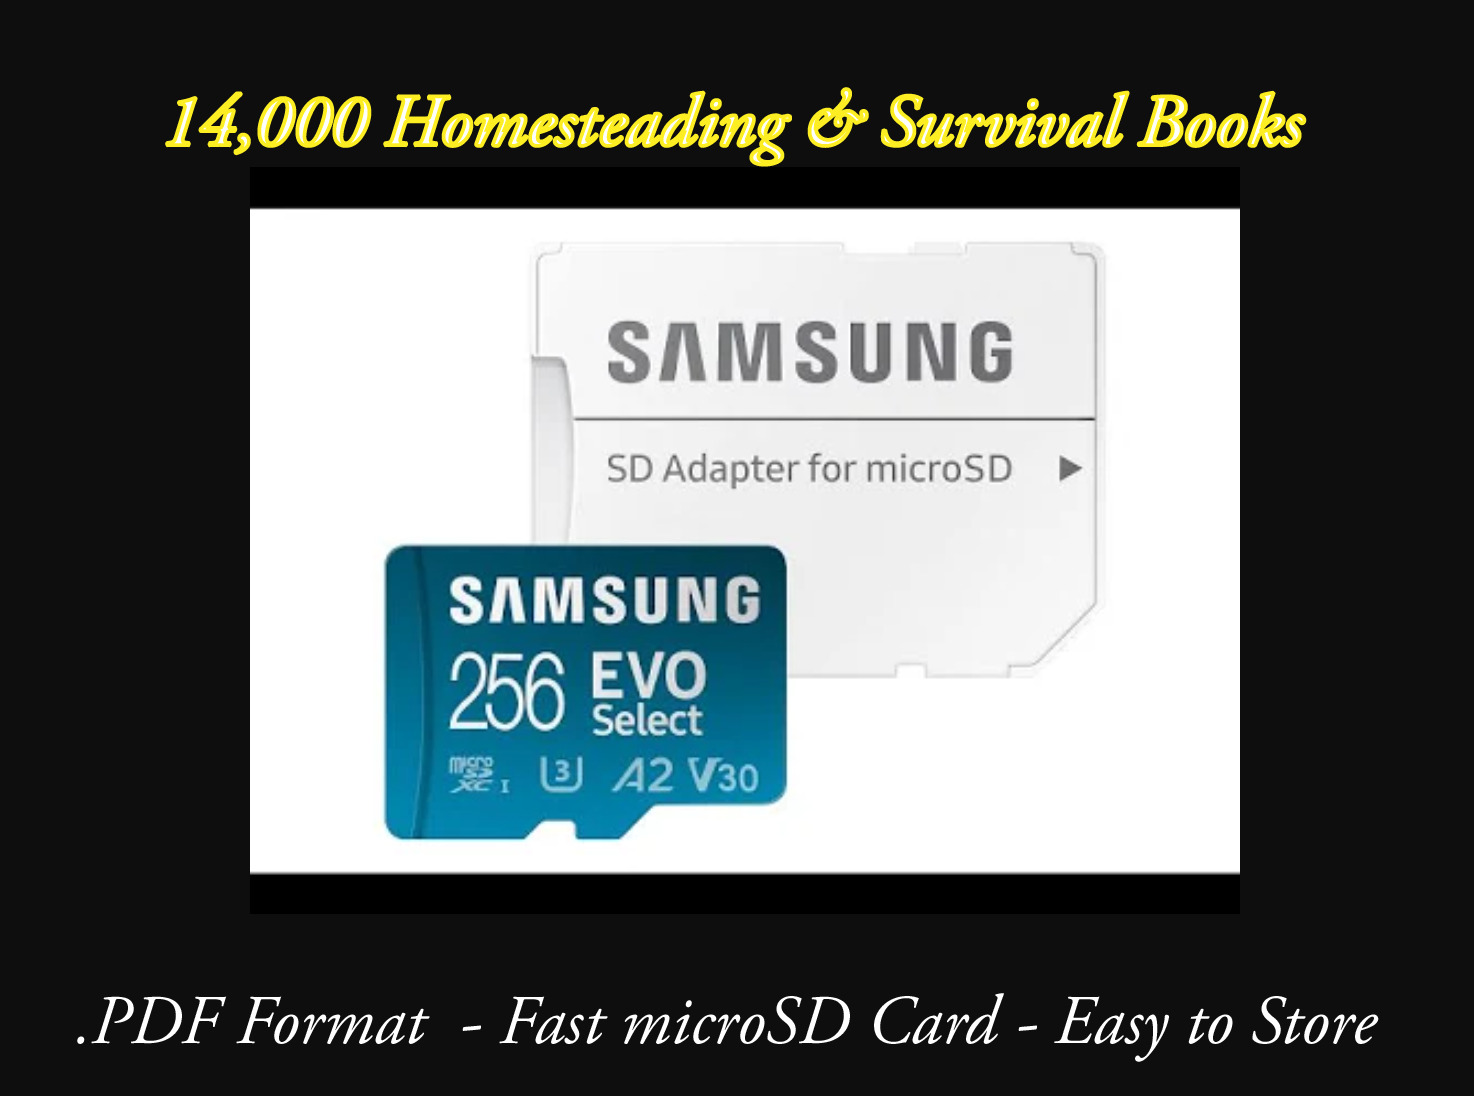 microSD Survival Library for Homesteading, Prepping, Off grid, 14,000 PDF eBooks